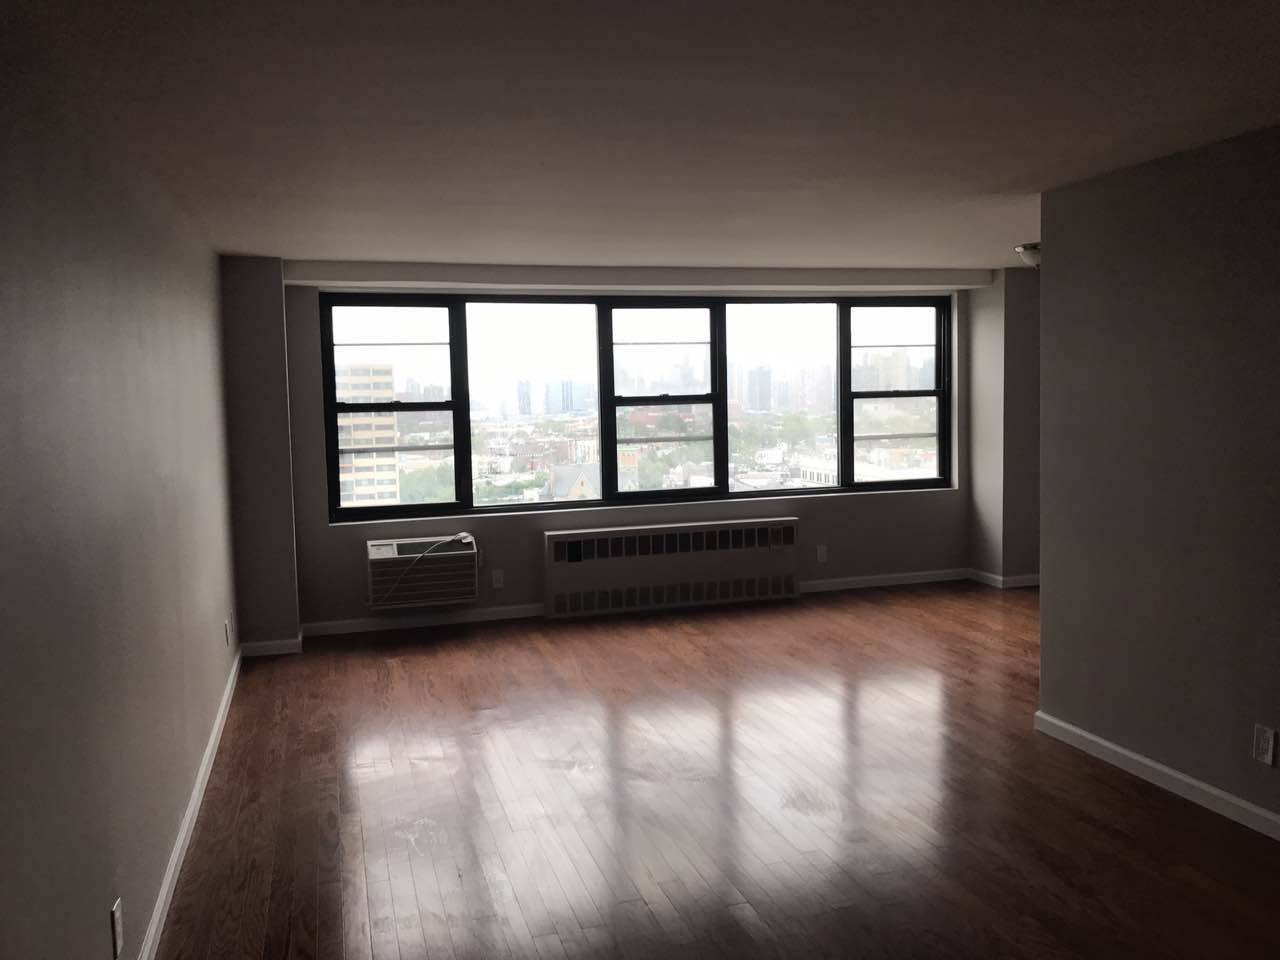 2 BEDROOM/1 BTH CONDO ON TOP FLOOR UNIT WITH FABULOUS UNOBSTRUCTED NYC VIEW